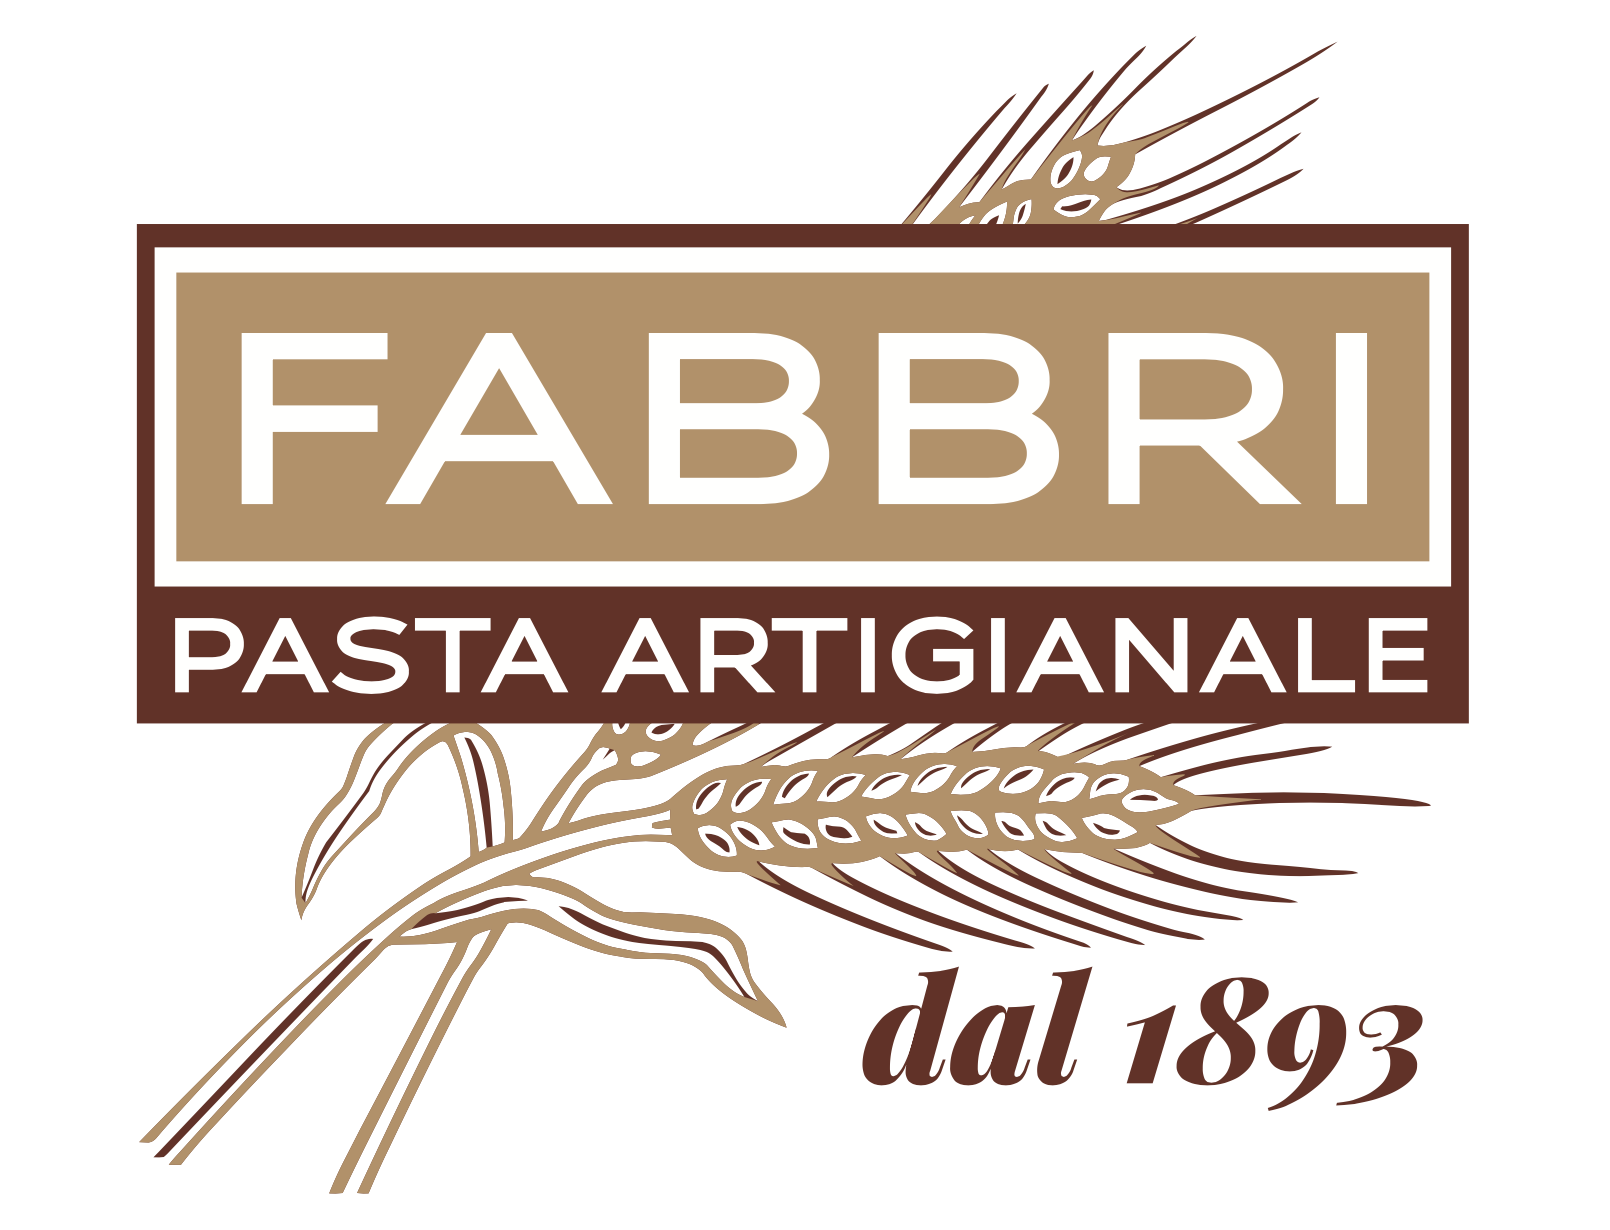 Immerse yourself in the authentic flavor of Chianti with the Artisanal Pasta Fabbri, the newest partner of the Chianti Classico Marathon 2024